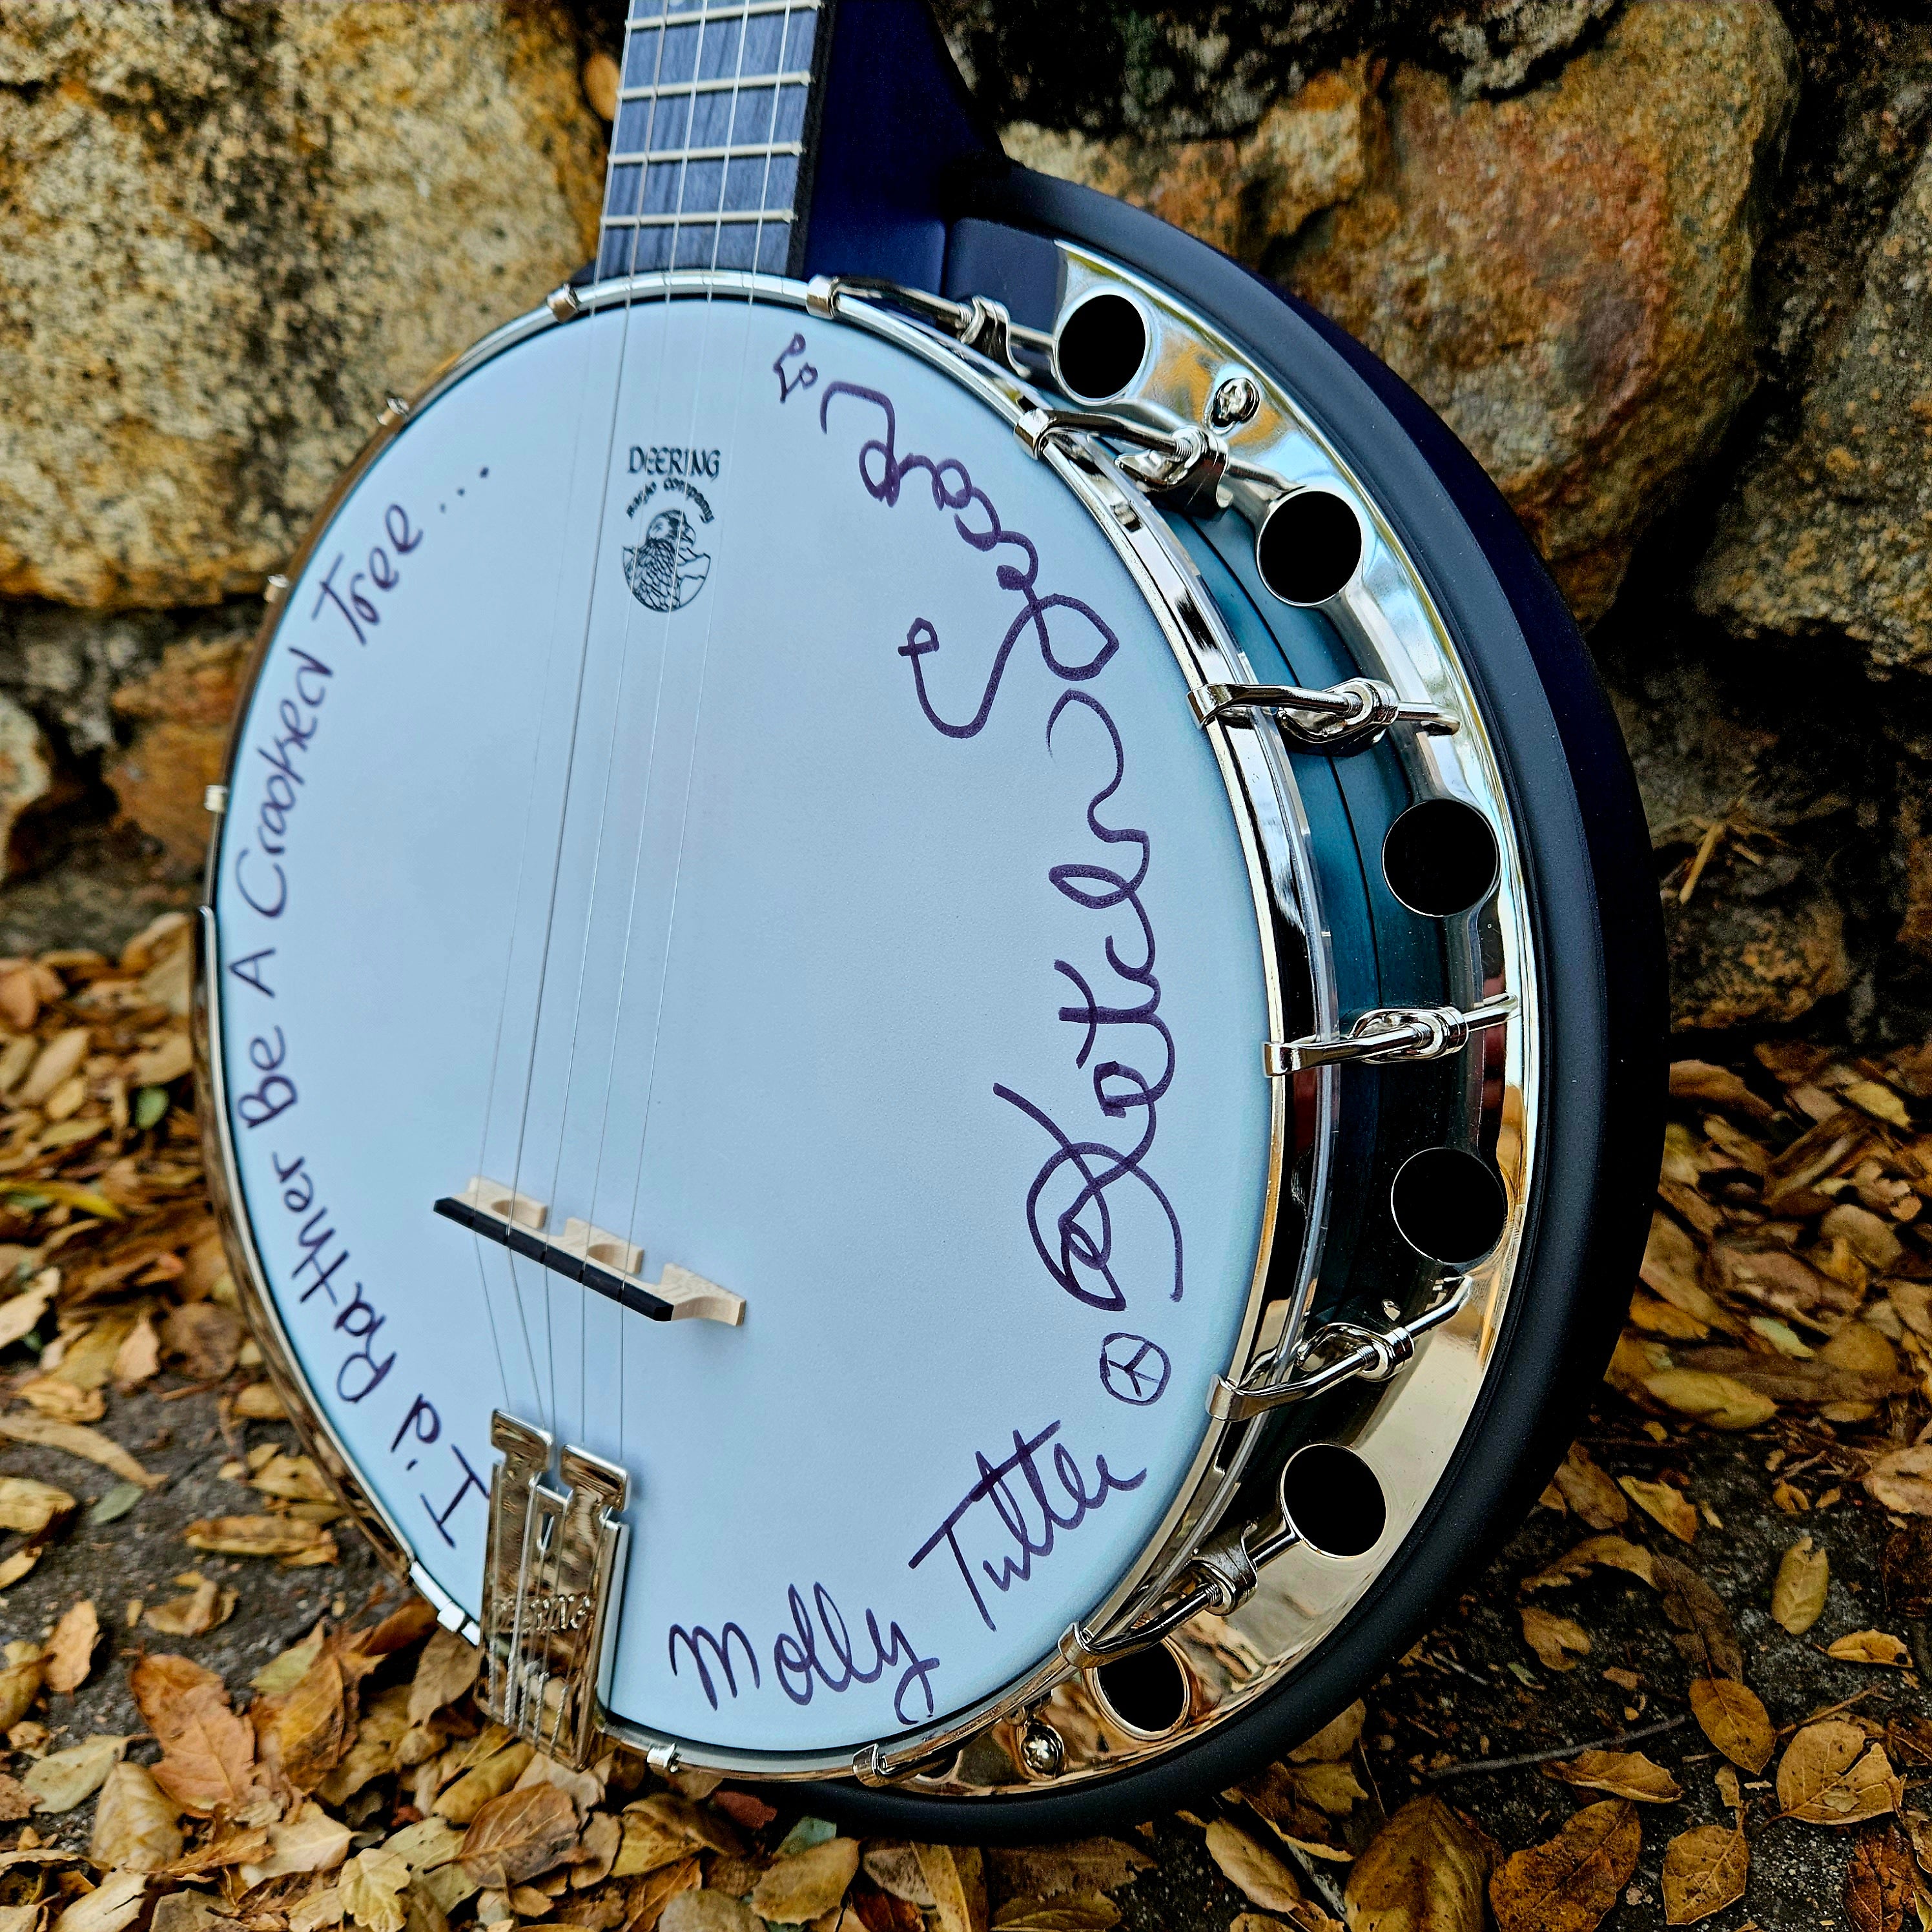 Molly Tuttle & Ketch Secor Giving Tuesday Charity Banjo!